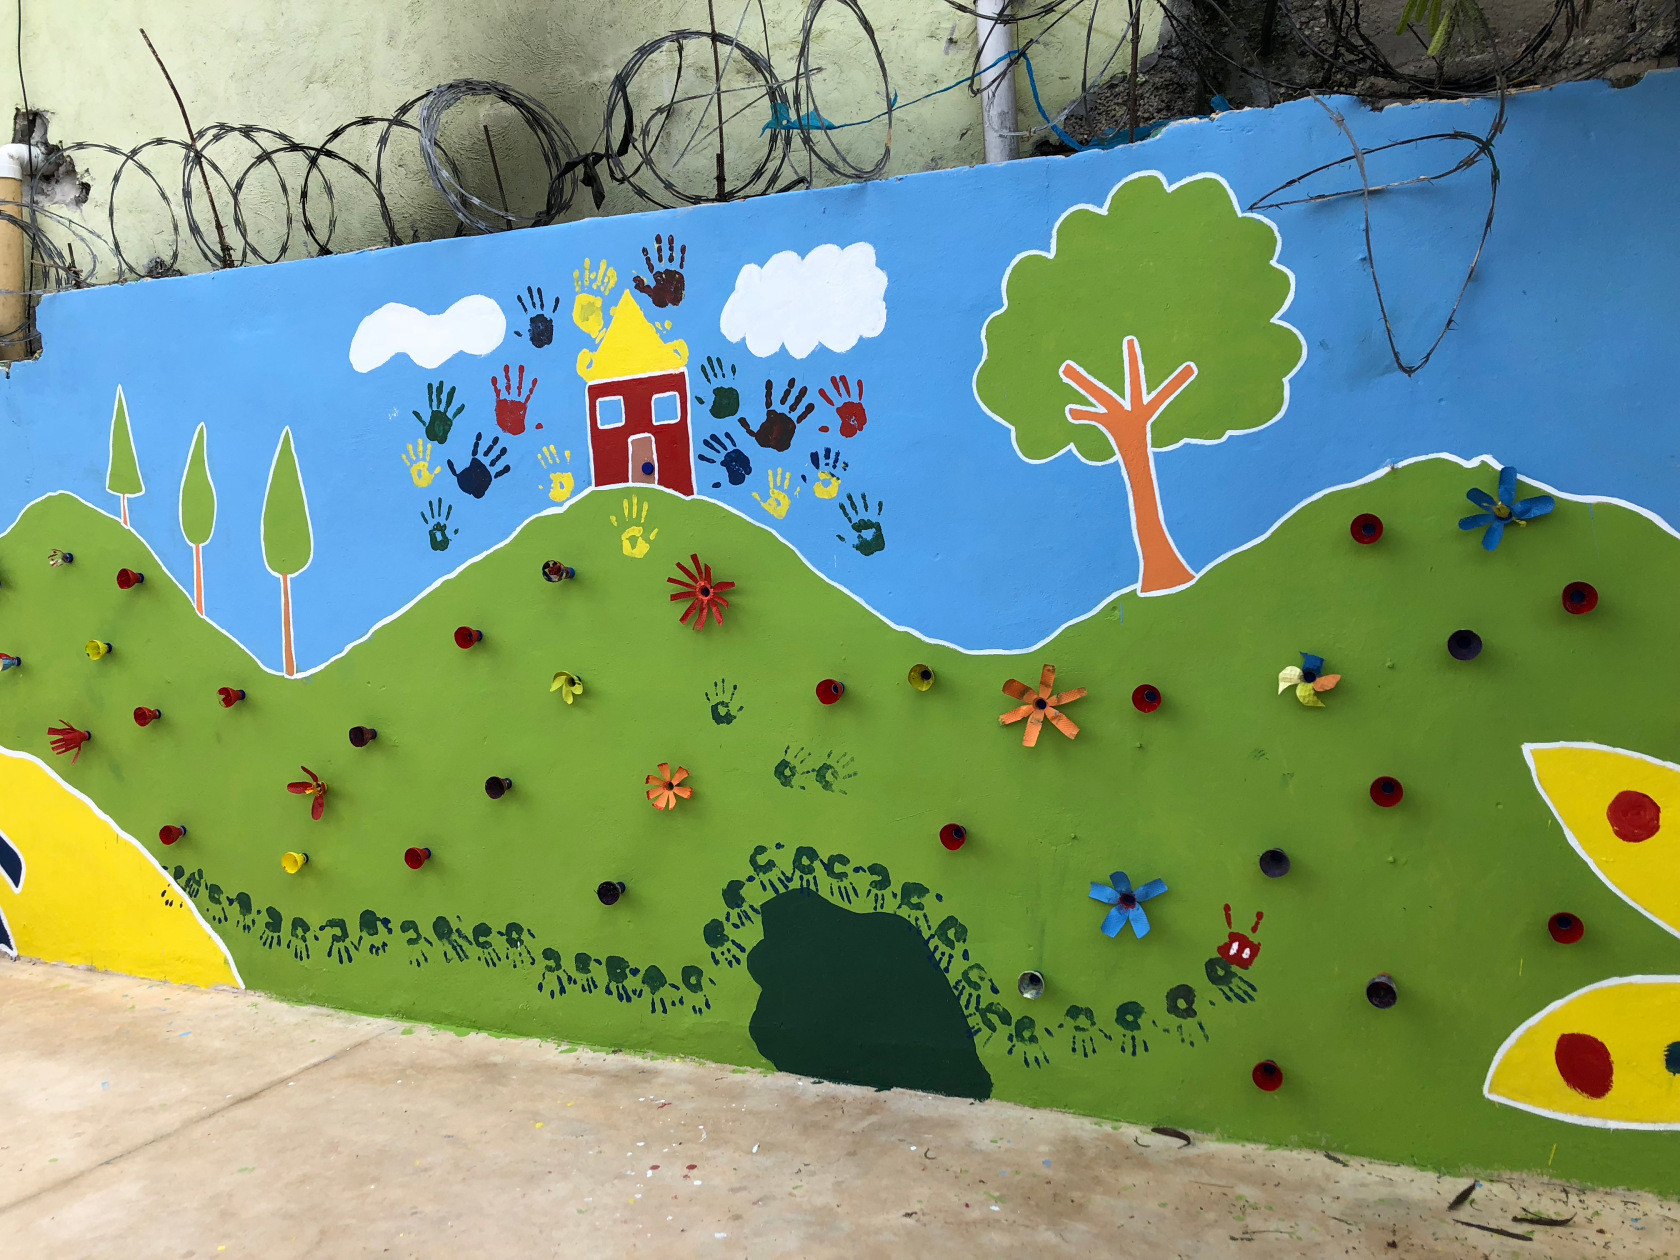 Volunteers used paint and recycled materials to create this mural outside a school in the Dominican Republic.